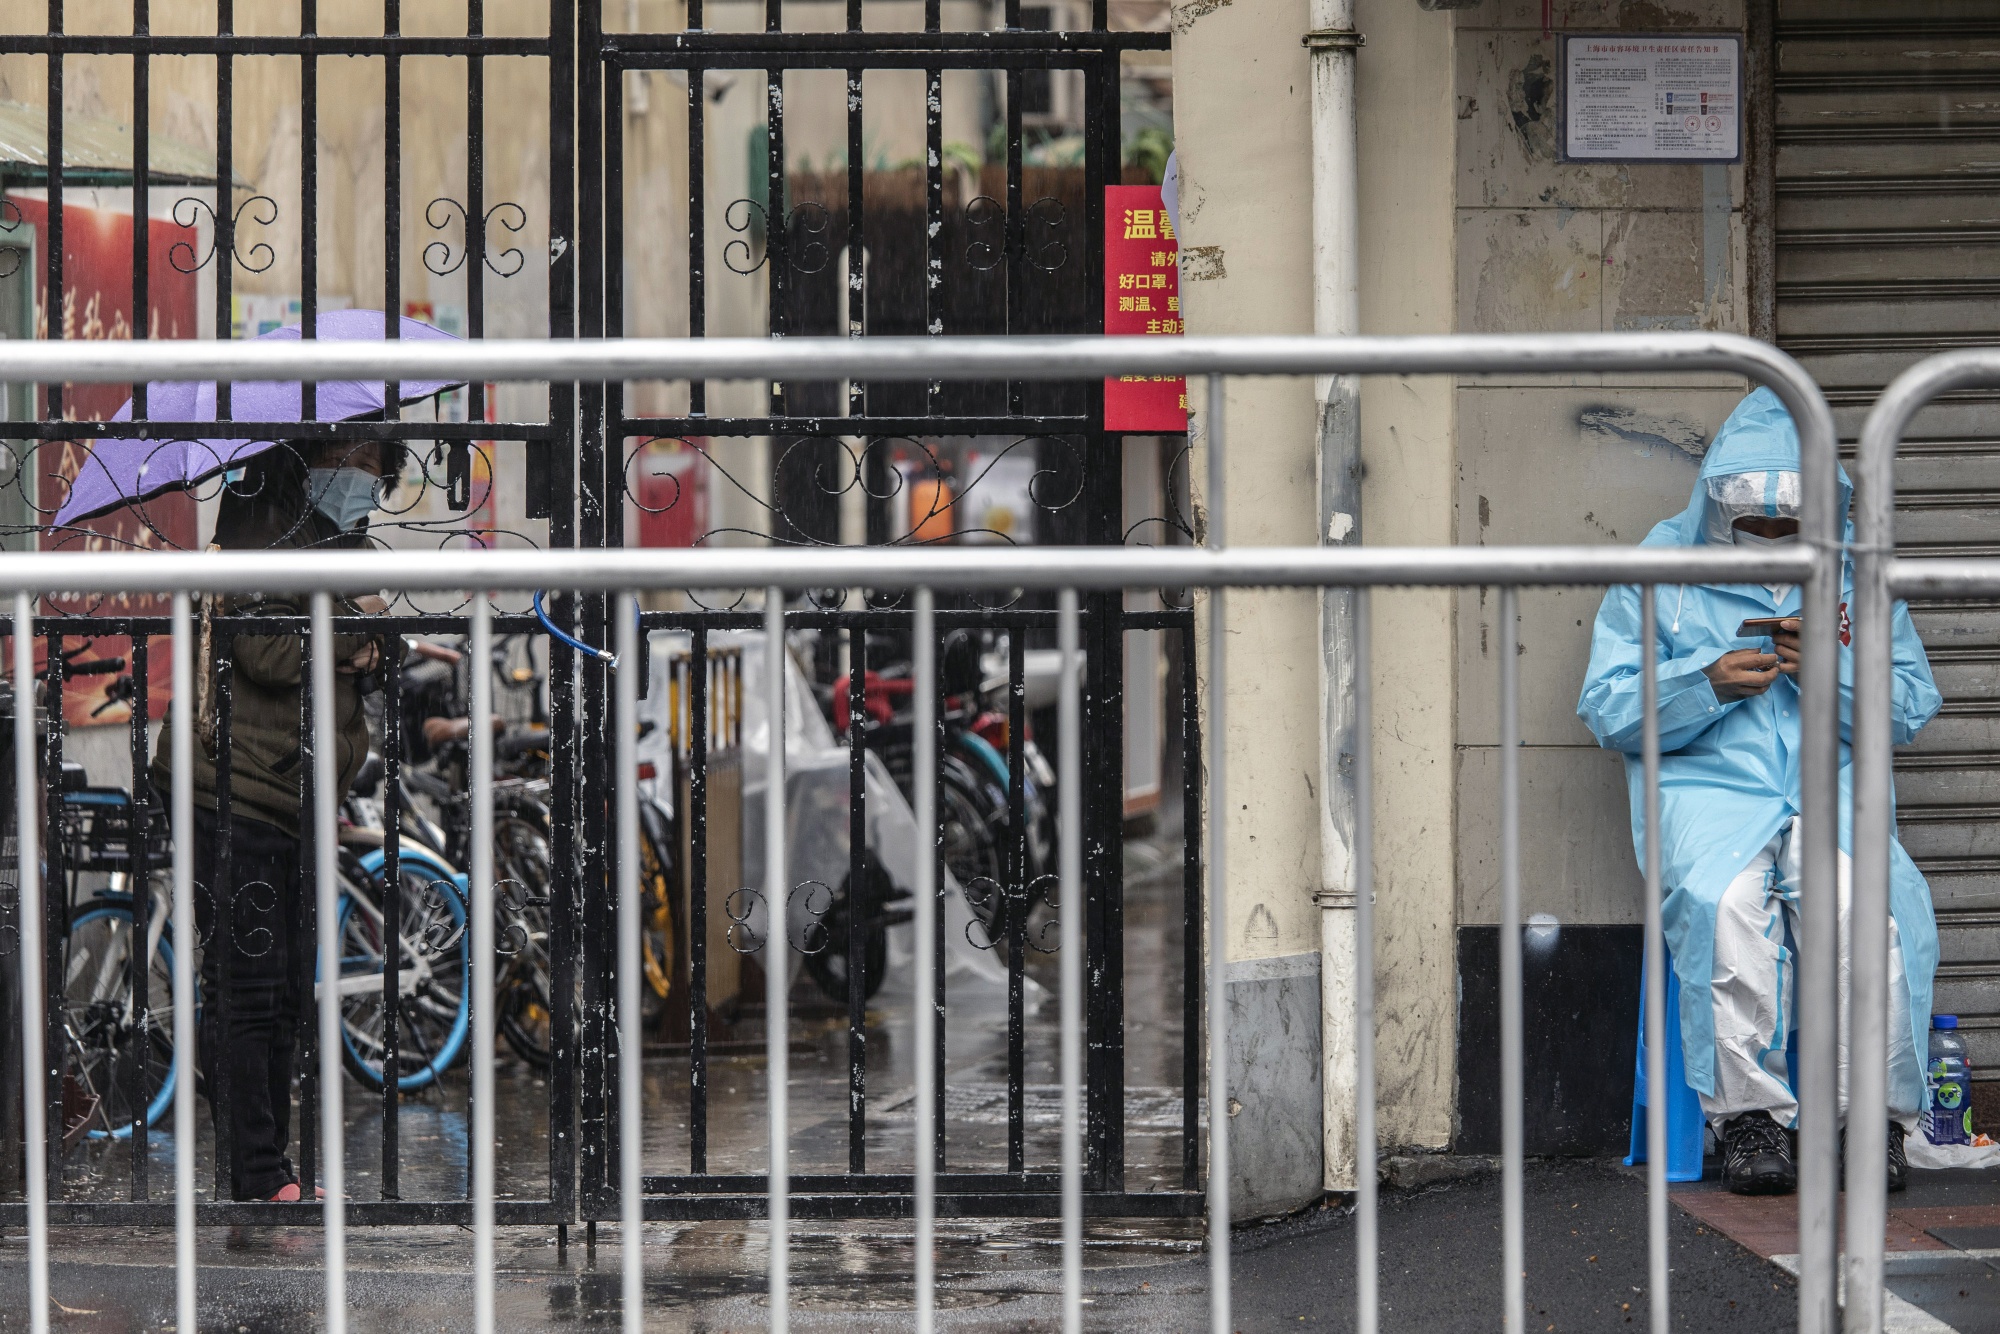 A worker&nbsp;at a neighborhood placed under lockdown due to Covid-19 in Shanghai, on March 25.